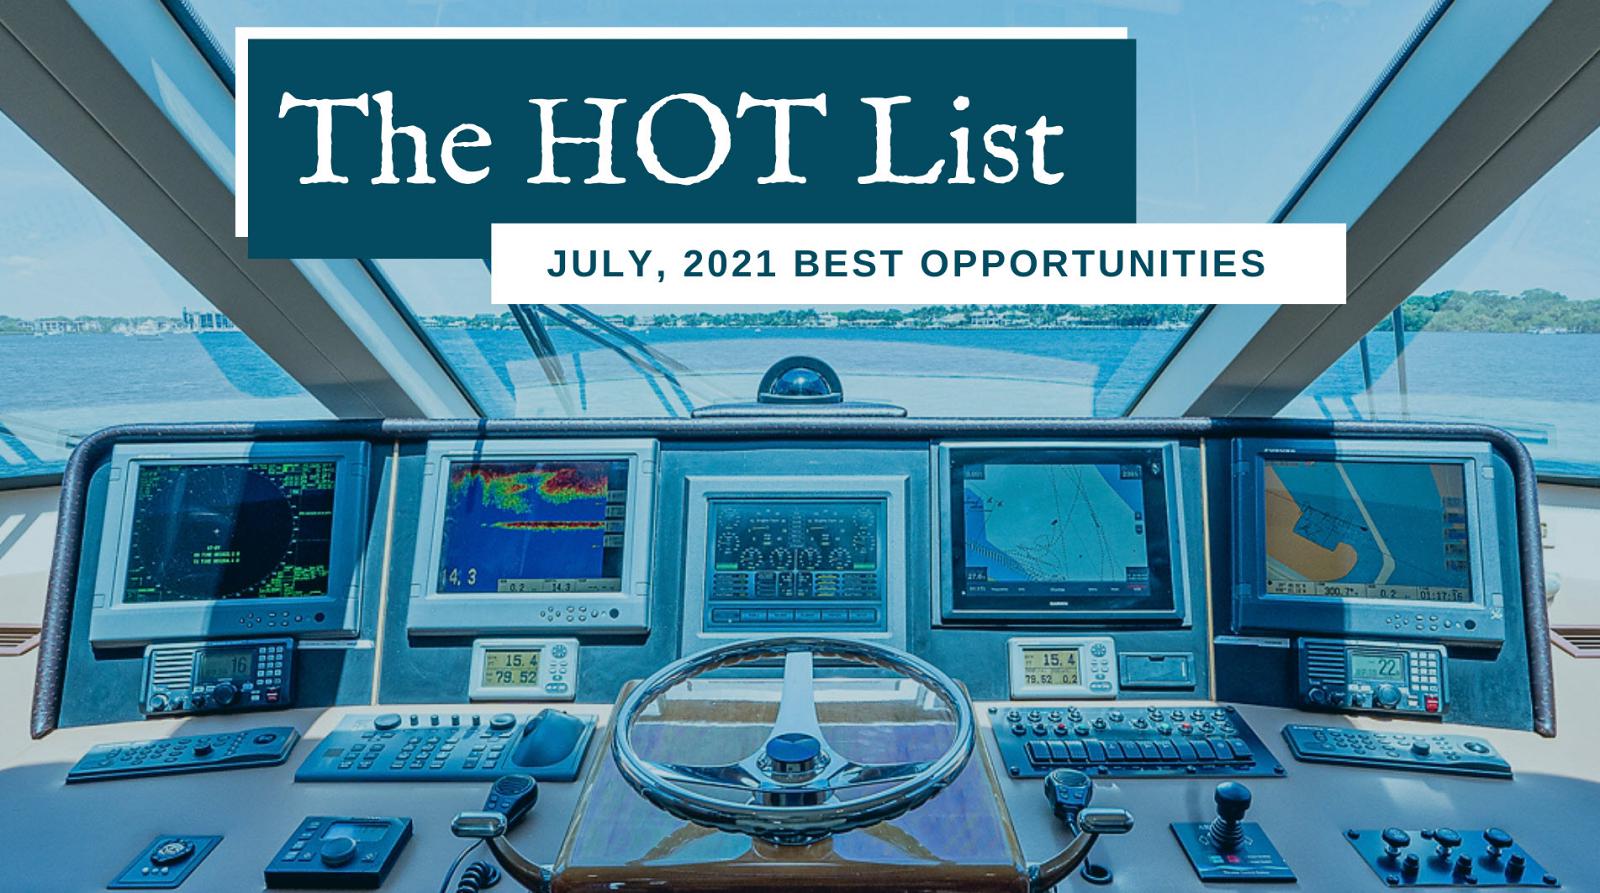 photo of The Hot List - July 2021